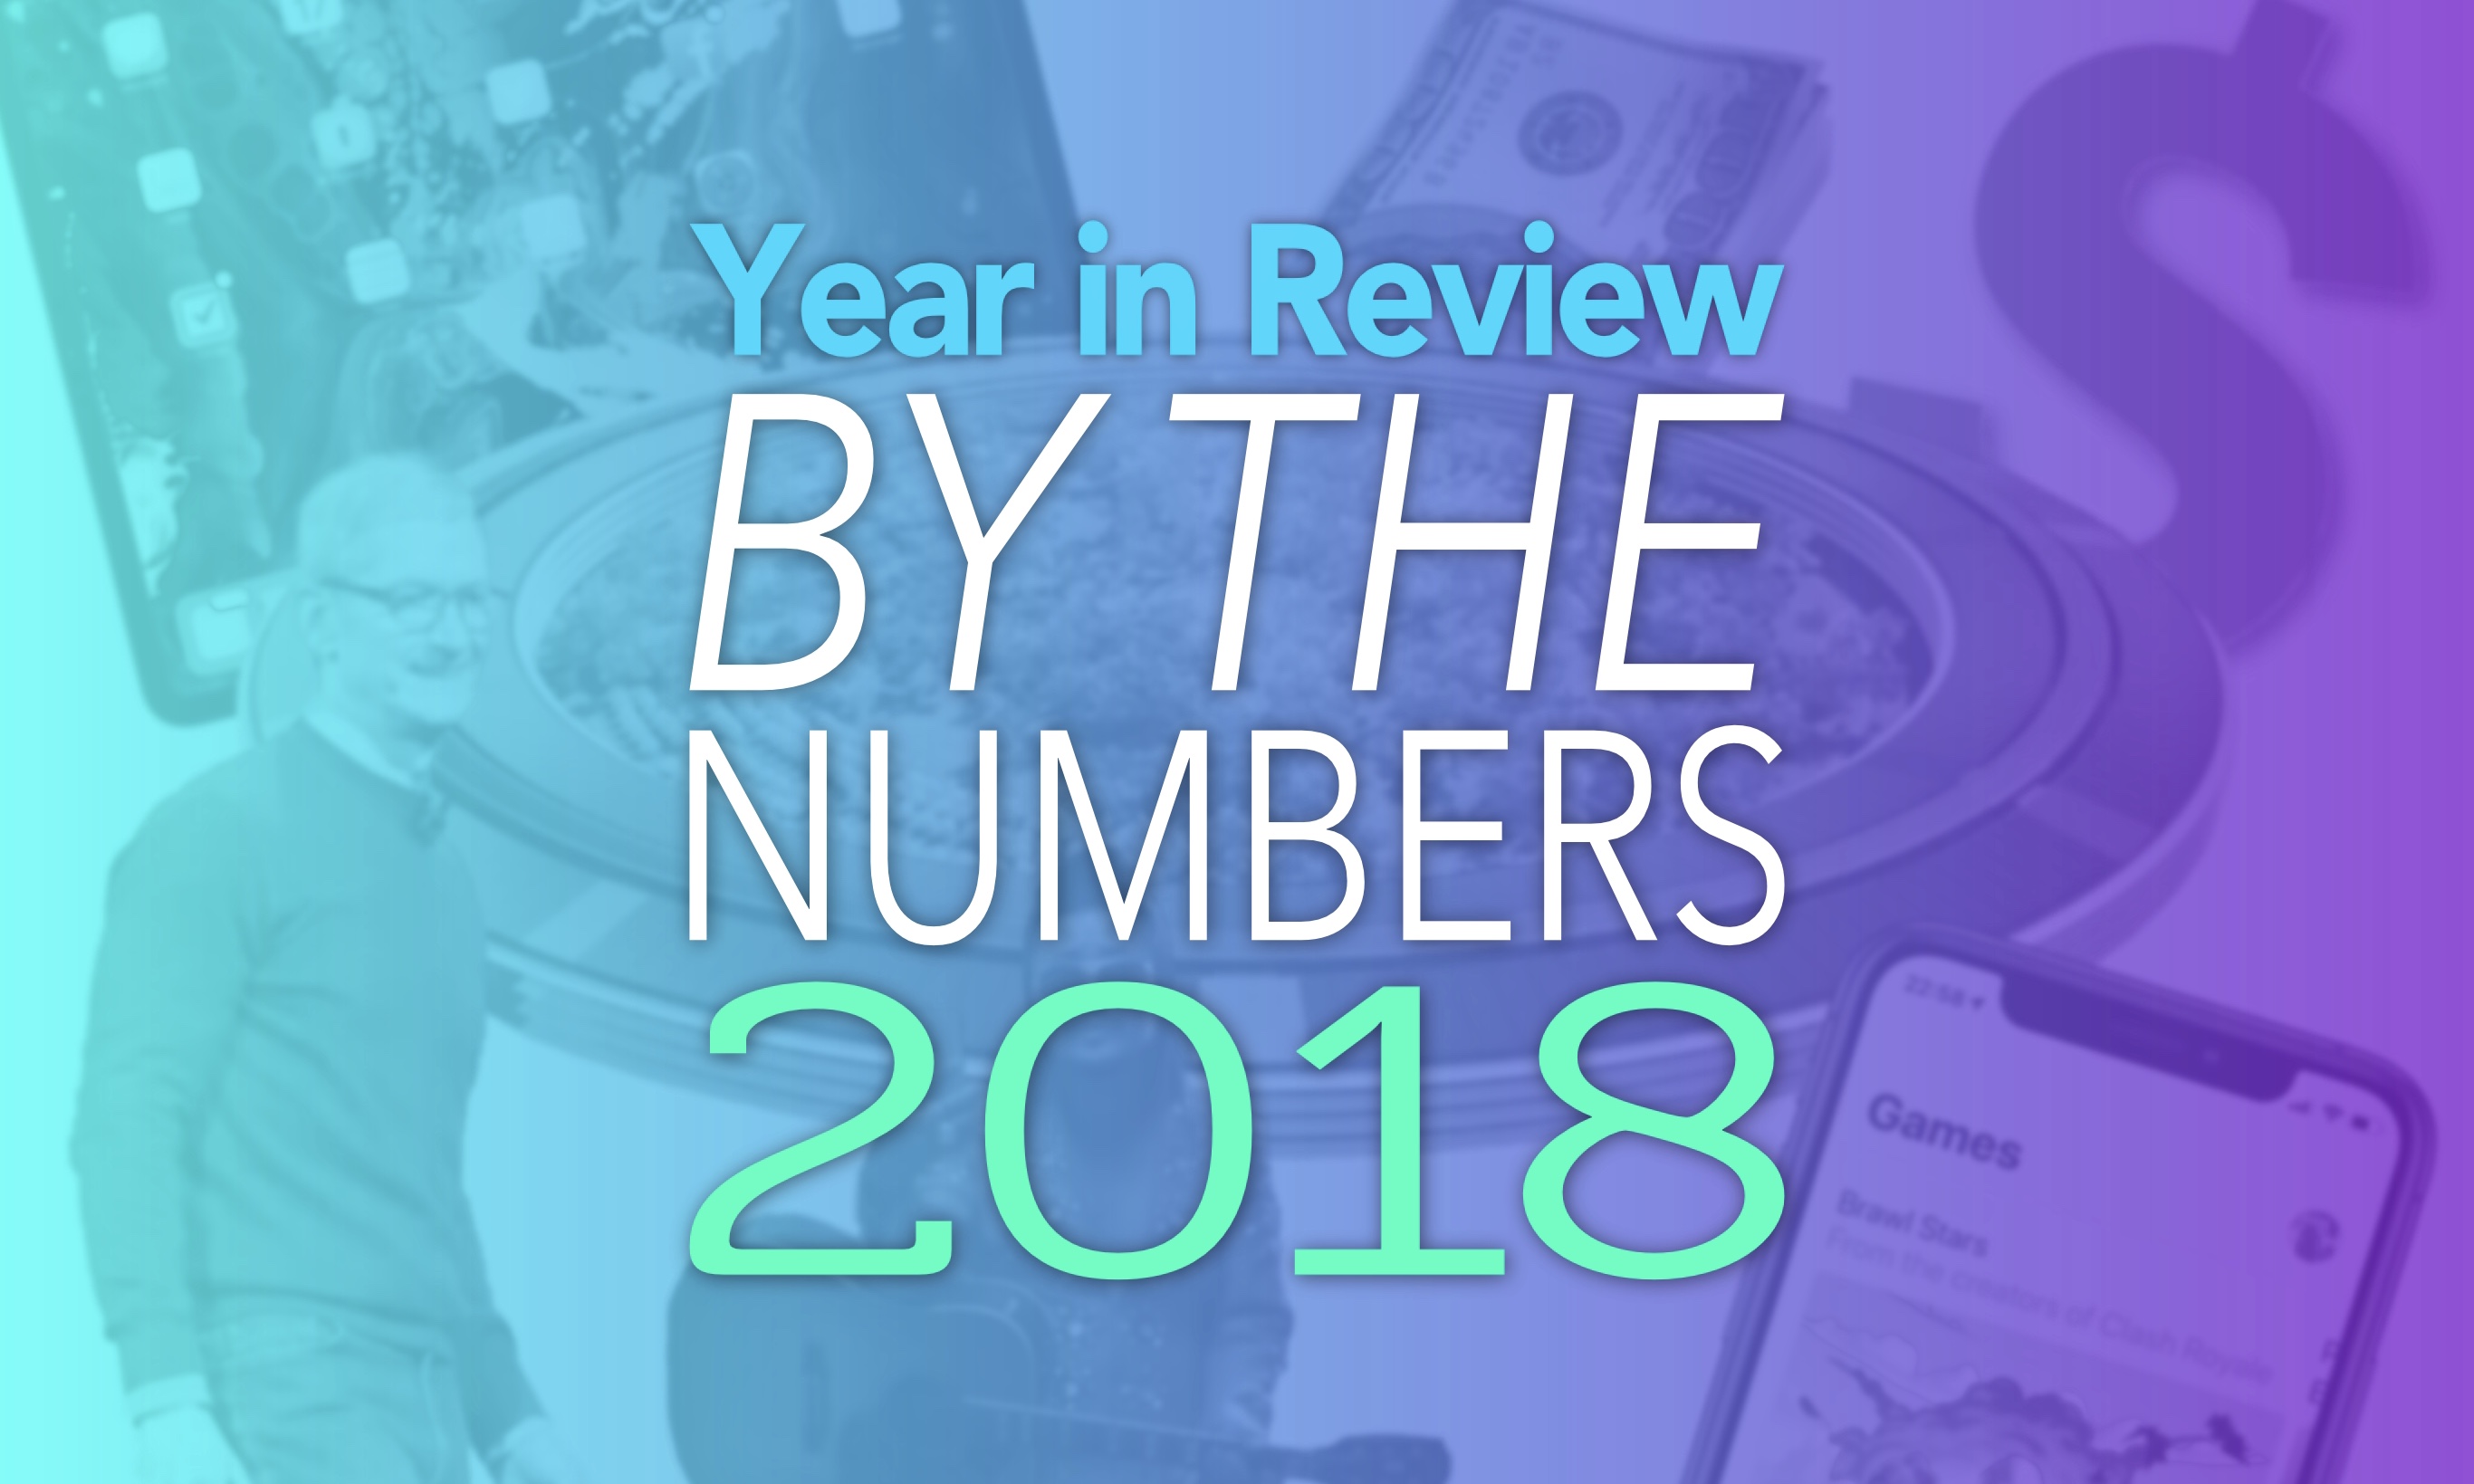 Apple Year in Review 2018 By the Numbers: Some of these Apple numbers are just huge.